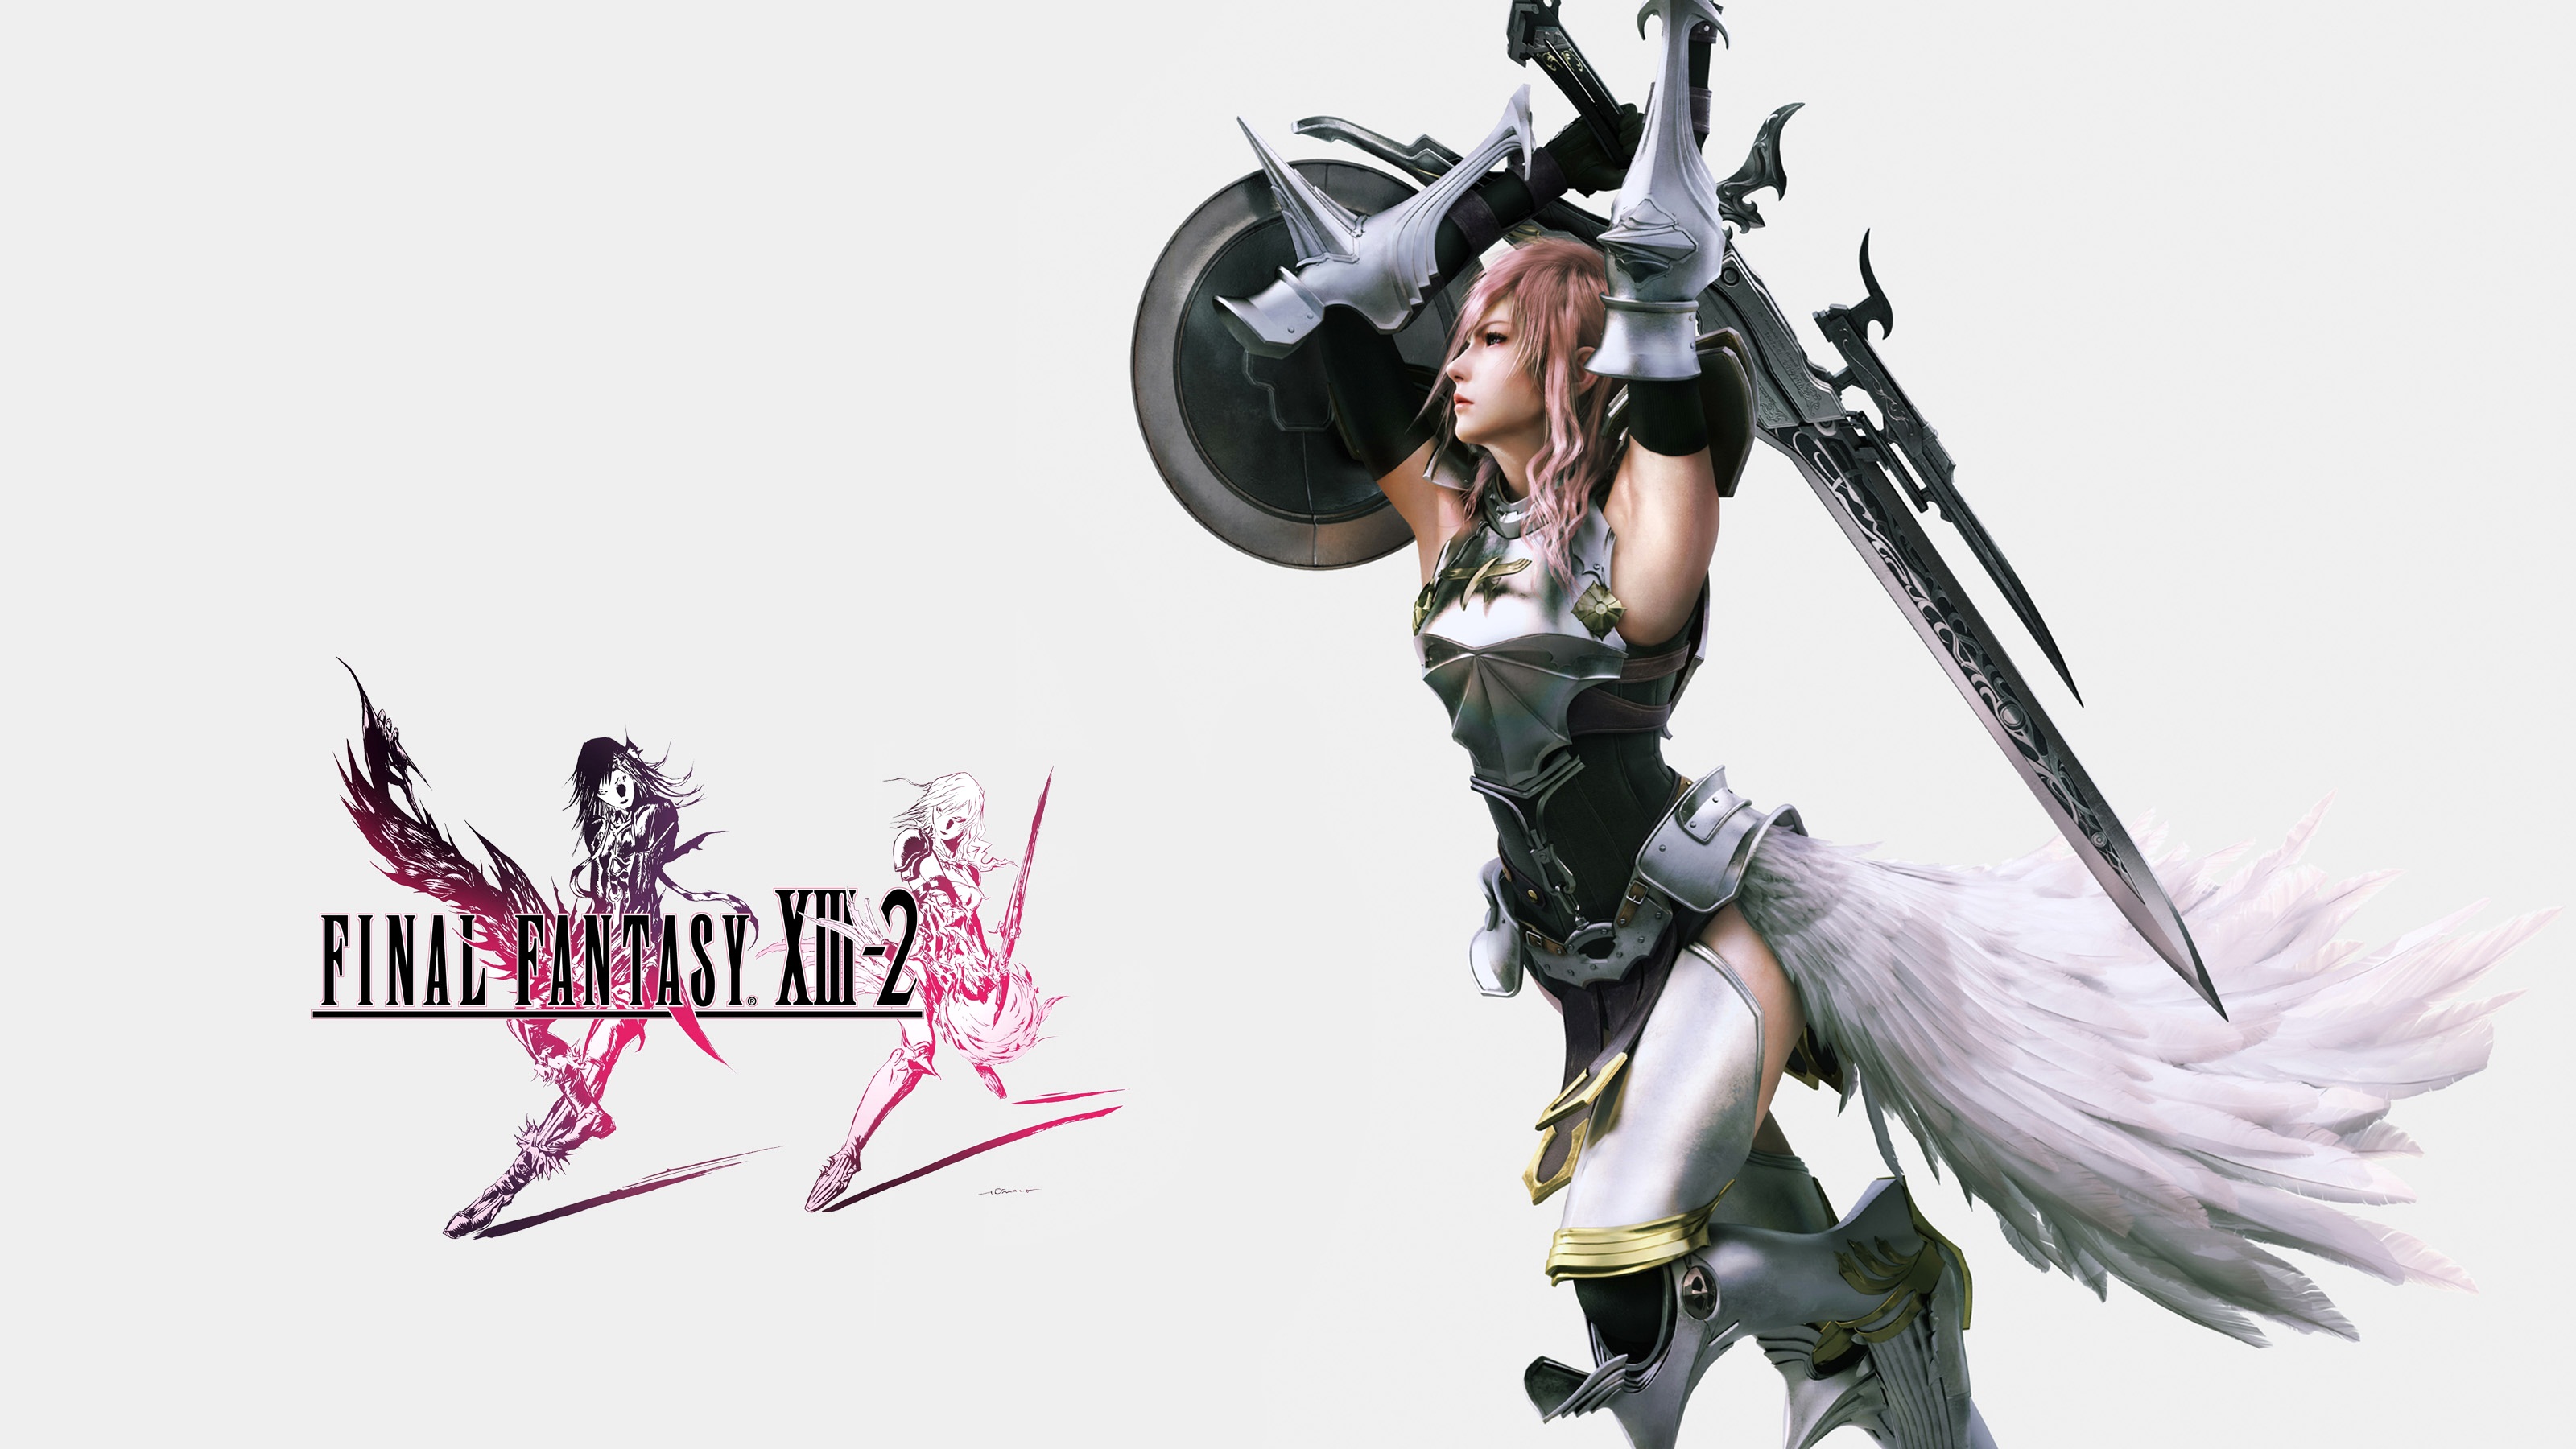 Final Fantasy Xiii 2 Wallpapers Video Game Hq Final Fantasy Xiii 2 Pictures 4k Wallpapers 19